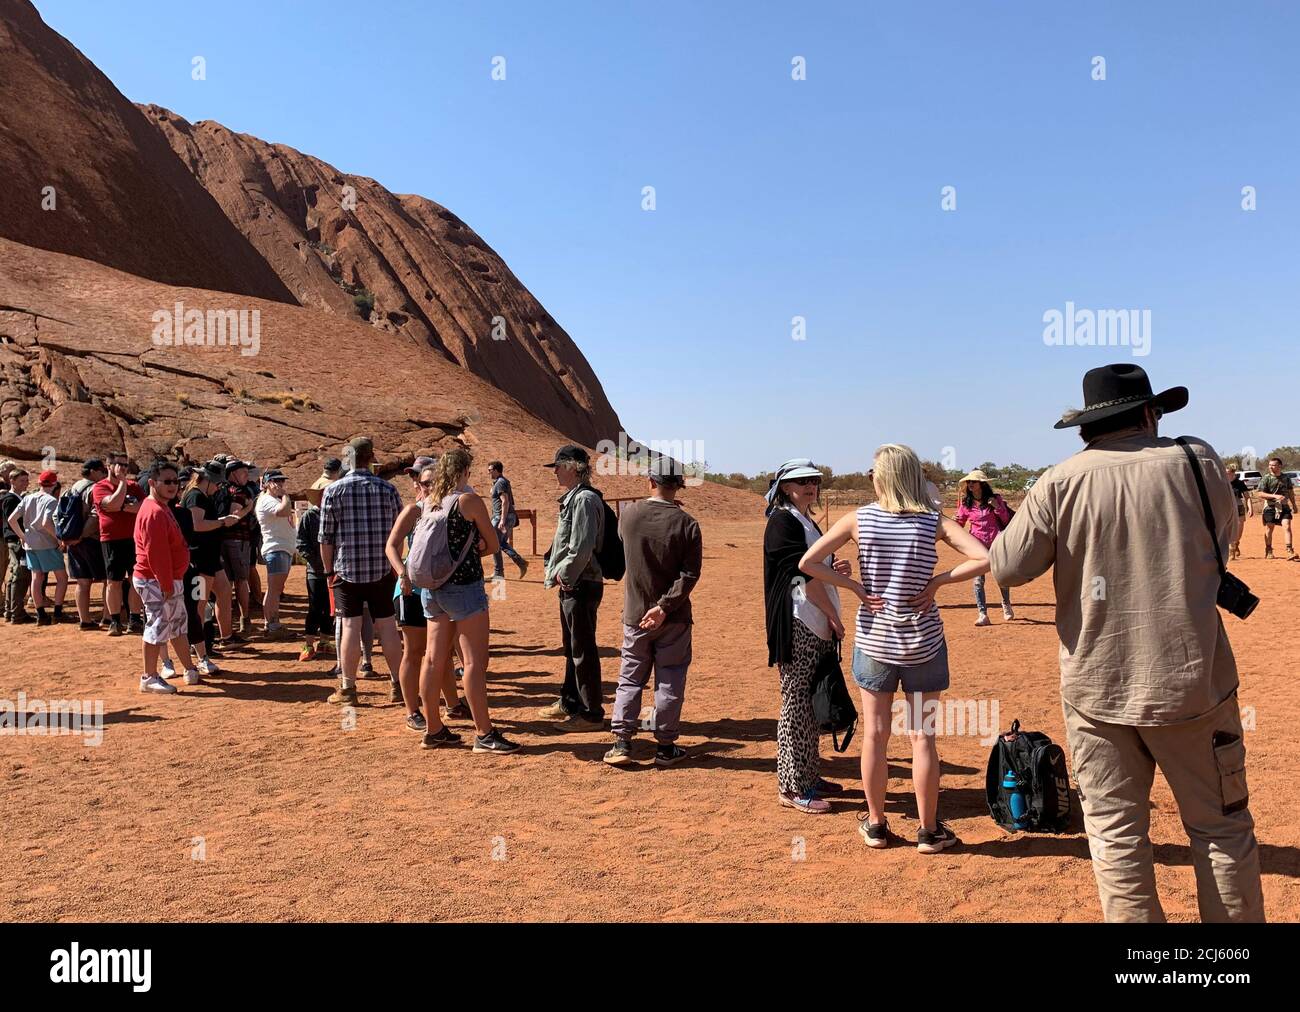 People line up to climb Uluru, formerly known as Ayers Rock, the day before a permanent ban on climbing the monolith takes effect following a decades-long fight by indigenous people to close the trek, near Yulara, Australia, October 25, 2019.  REUTERS/Stefica Bikes Stock Photo